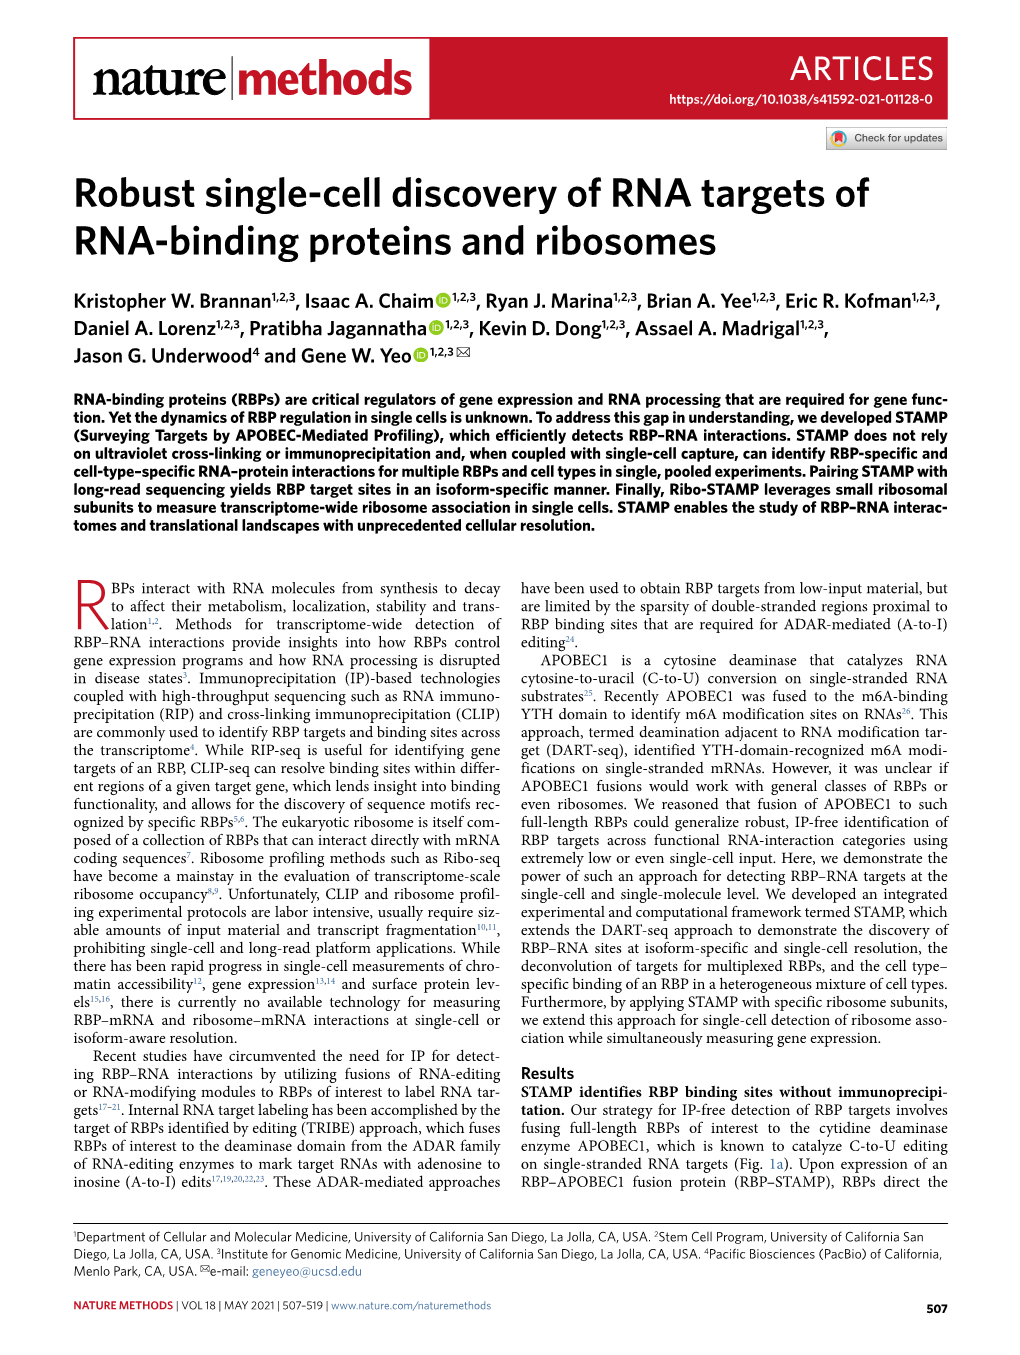 Robust Single-Cell Discovery of RNA Targets of RNA-Binding Proteins and Ribosomes